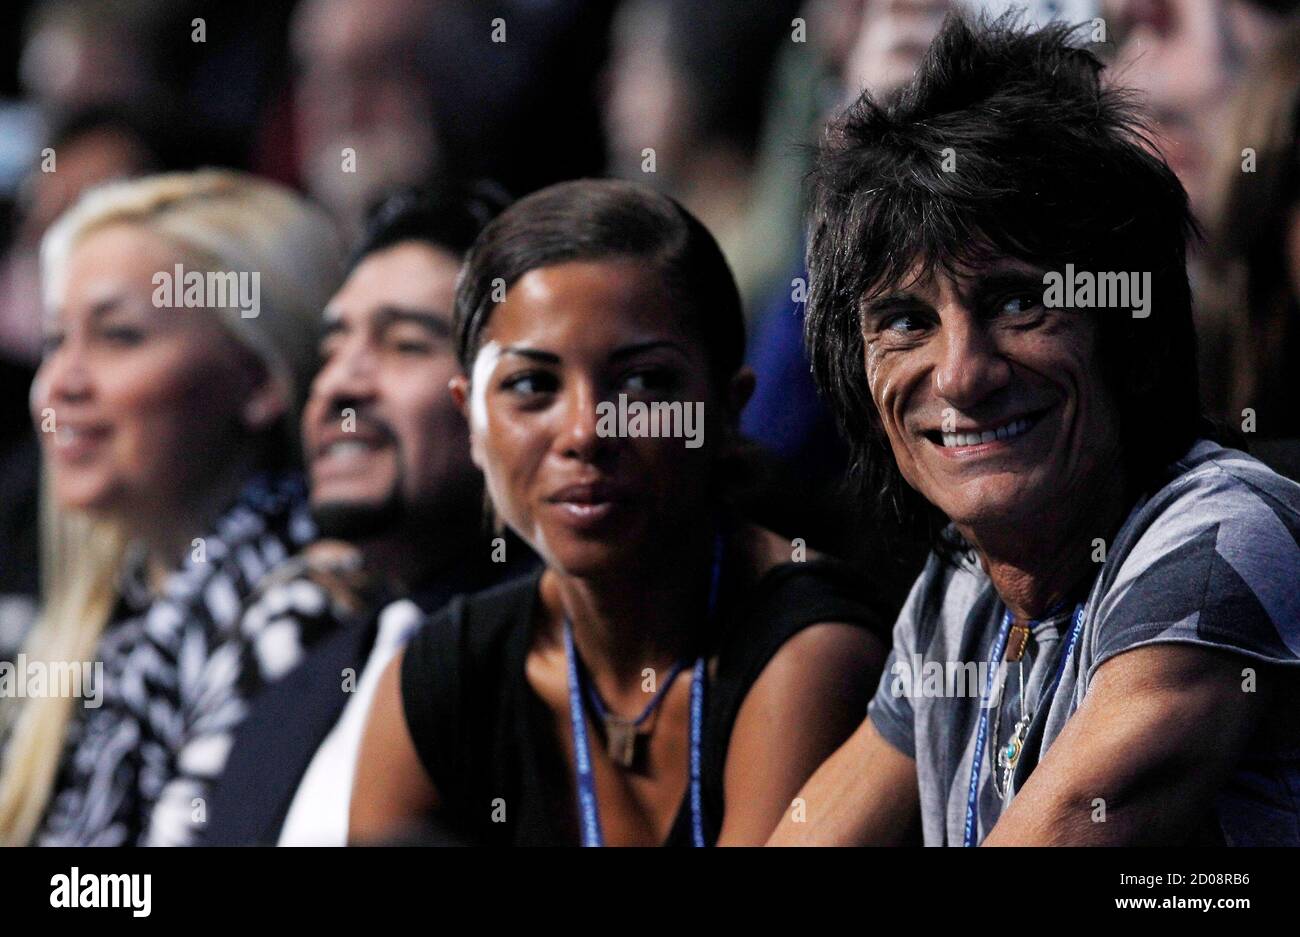 Veronica Ojeda (L), former Argentine soccer star Diego Maradona (2nd L), British musician Ron Wood (R) and his girlfriend Ana Araujo watch the finals match between Spain's Rafael Nadal and Switzerland's Roger Federer at the ATP World Tour Finals in London November 28, 2010. REUTERS/Suzanne Plunkett (BRITAIN - Tags: SPORT TENNIS ENTERTAINMENT SOCCER) Stock Photo